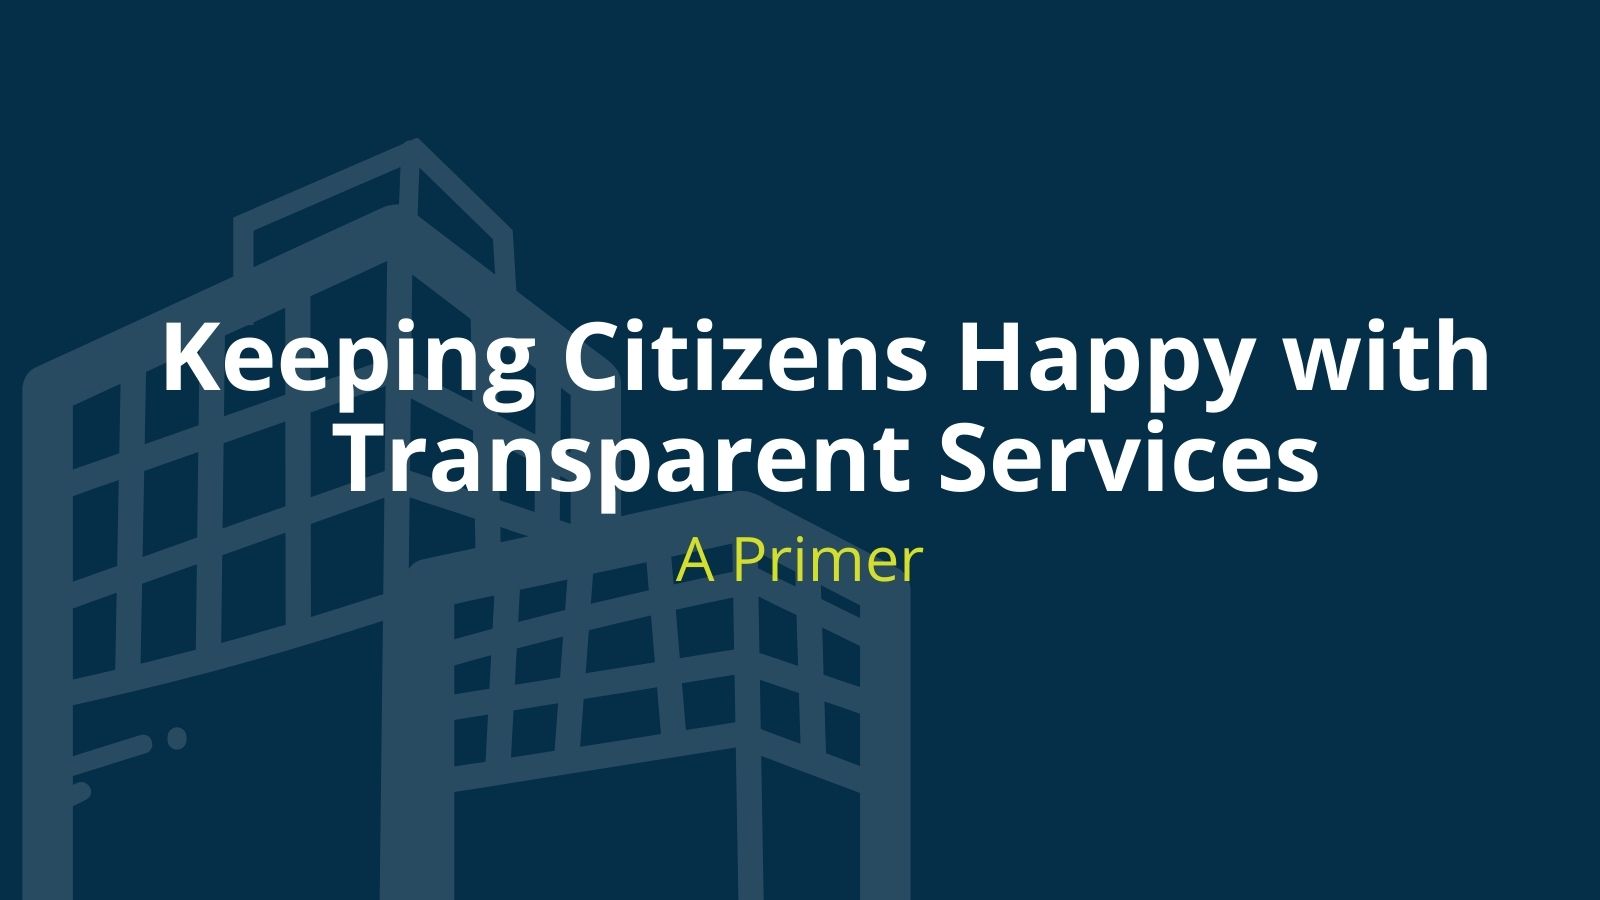 Keeping Citzens Happy with Transparent Services text over a silhouette image of two buildings